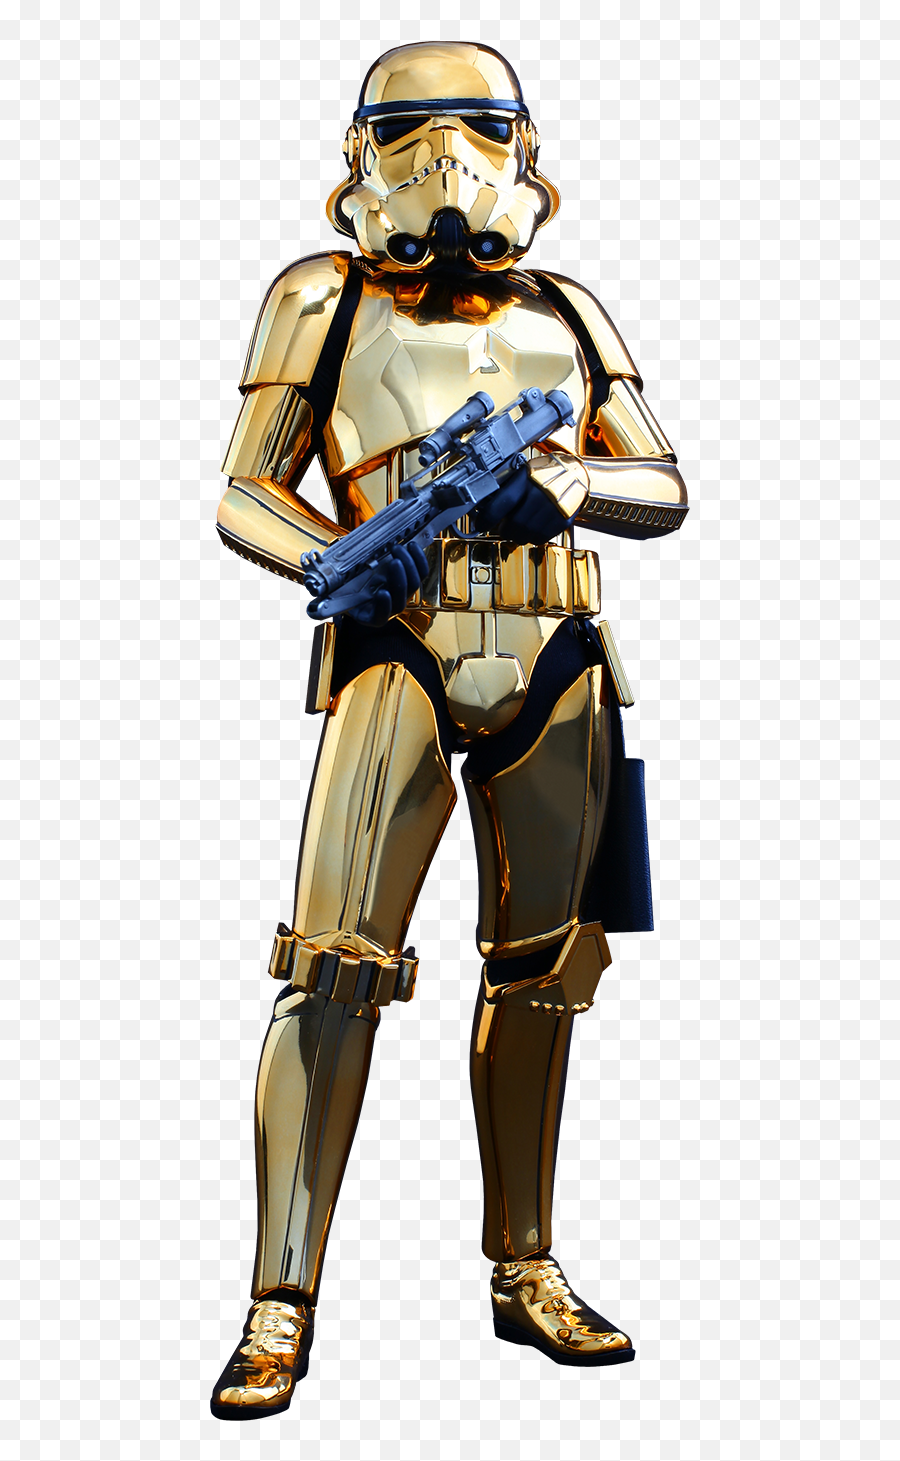 Star Wars Stormtrooper Png - Gold And Copper Stormtrooper,Stormtrooper Png